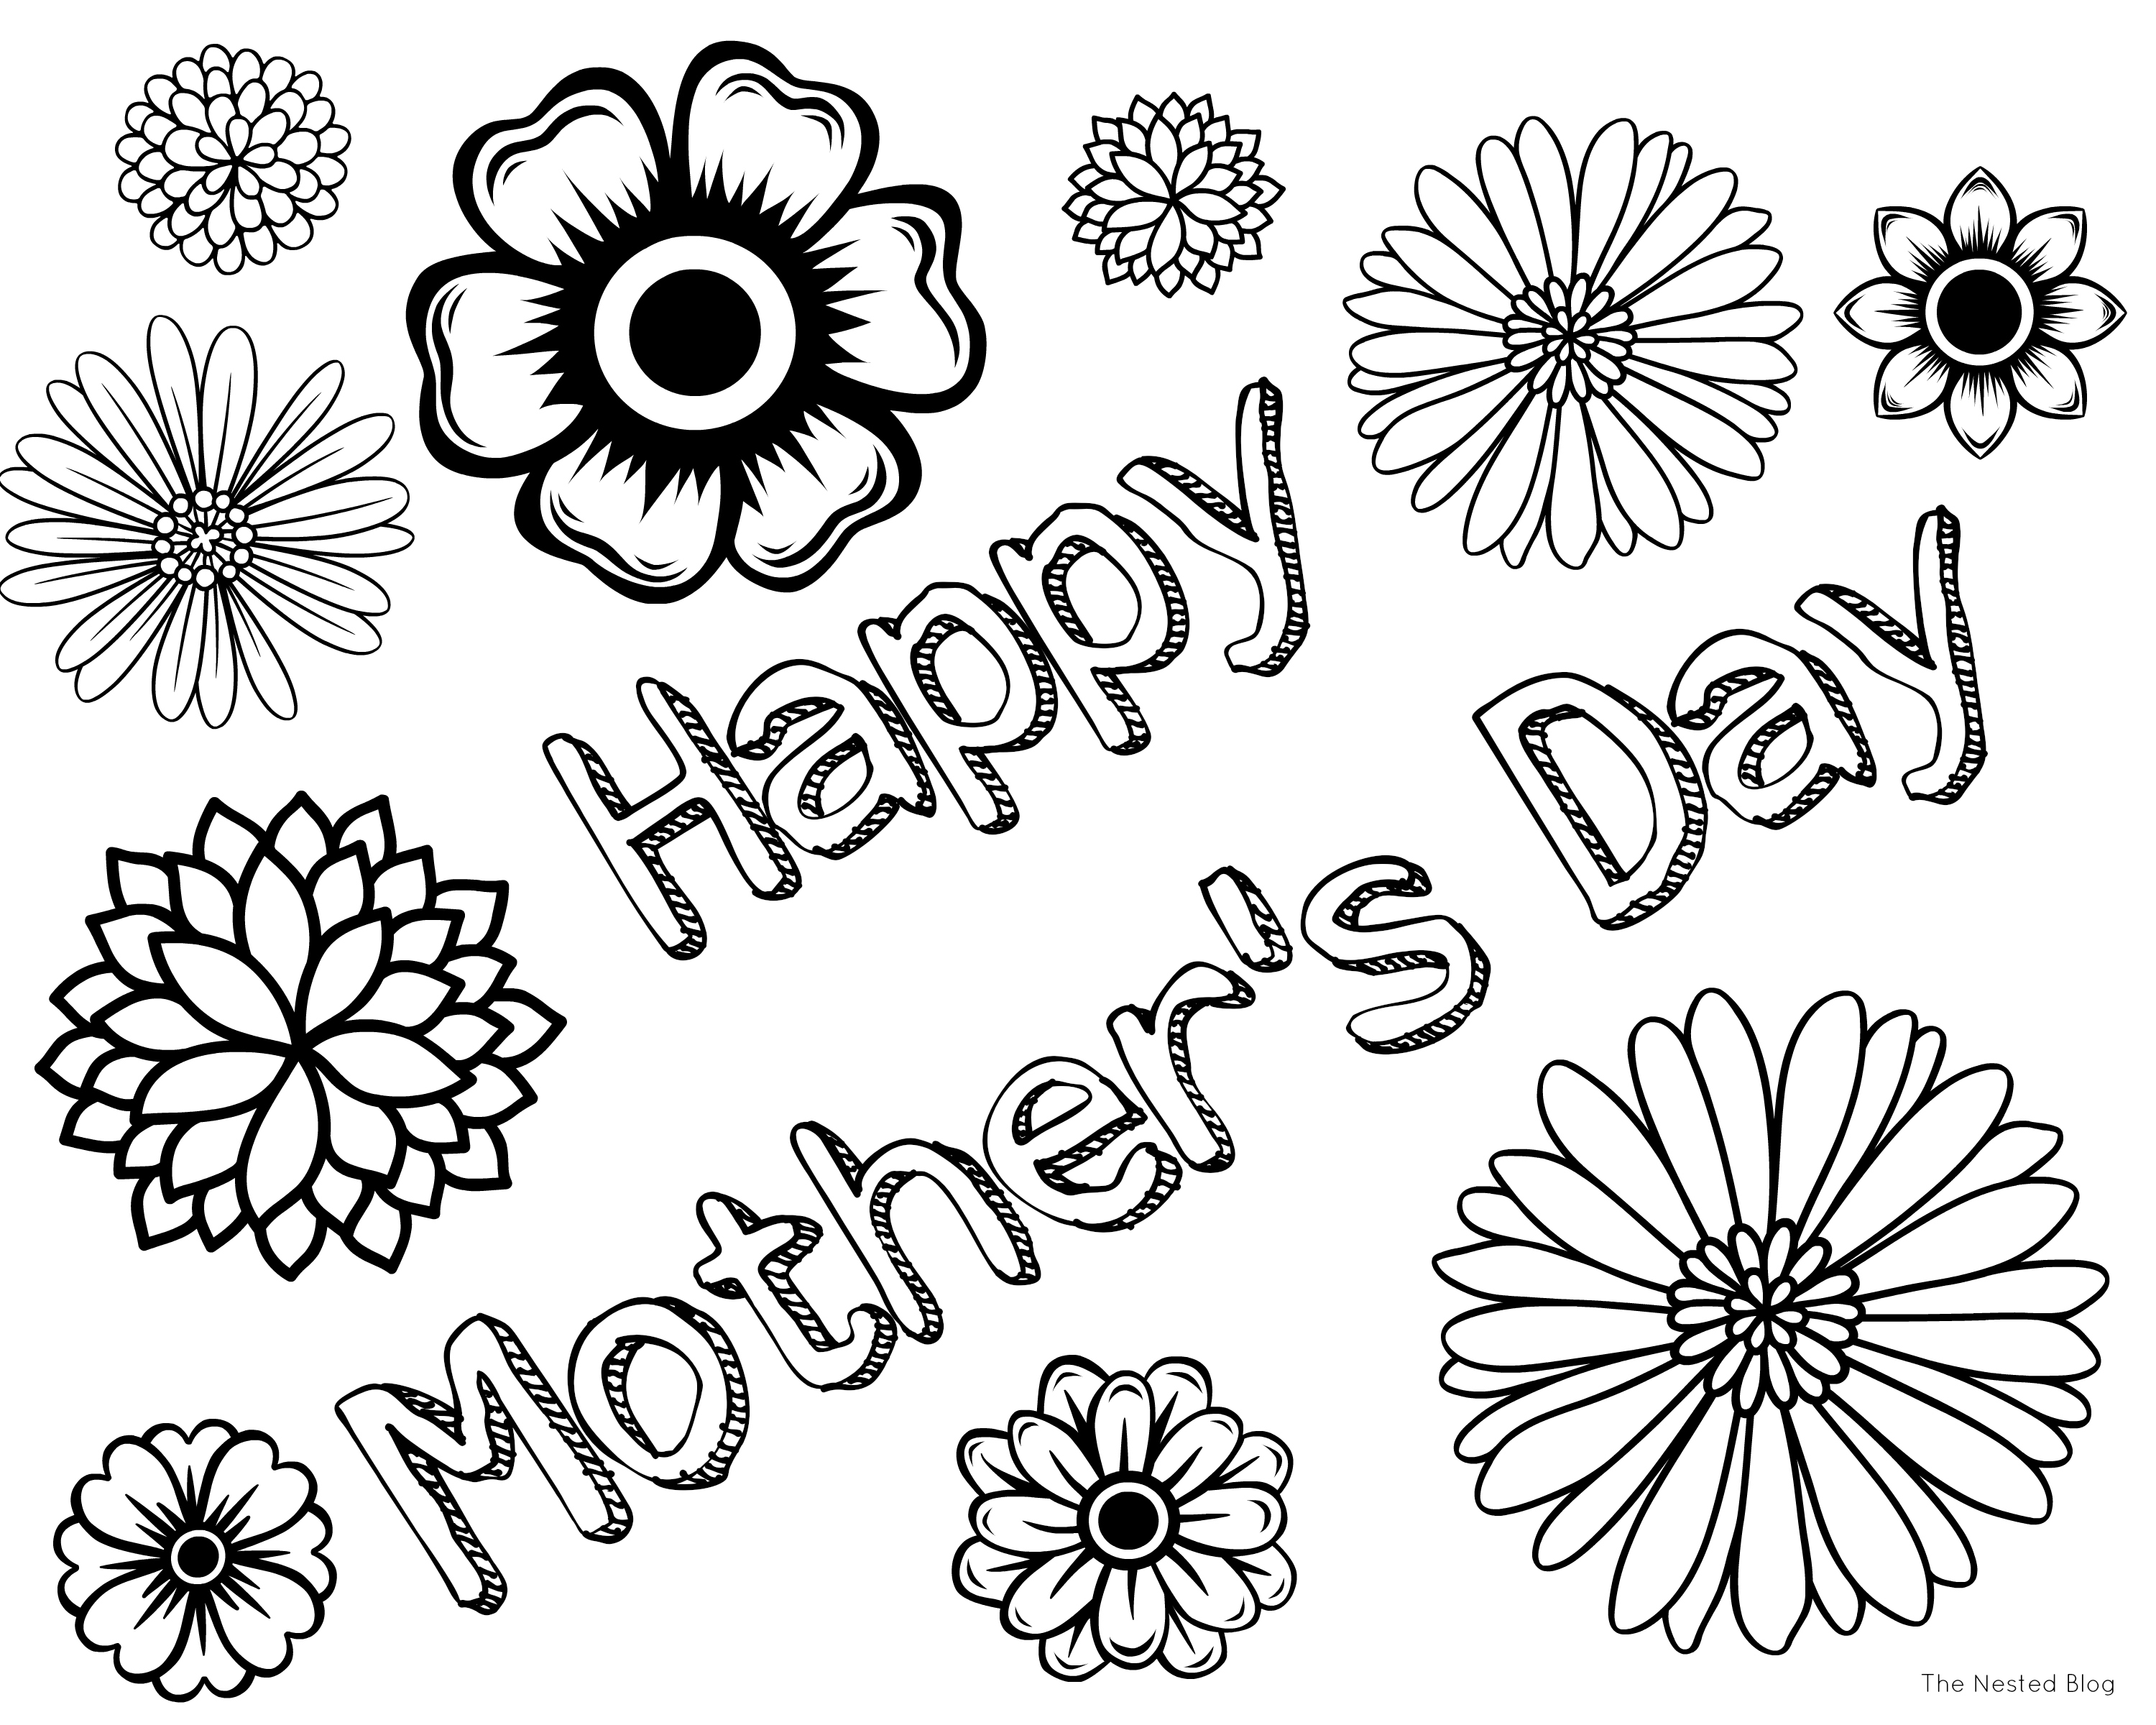 drawing-mothers-day-129764-holidays-and-special-occasions-printable-coloring-pages